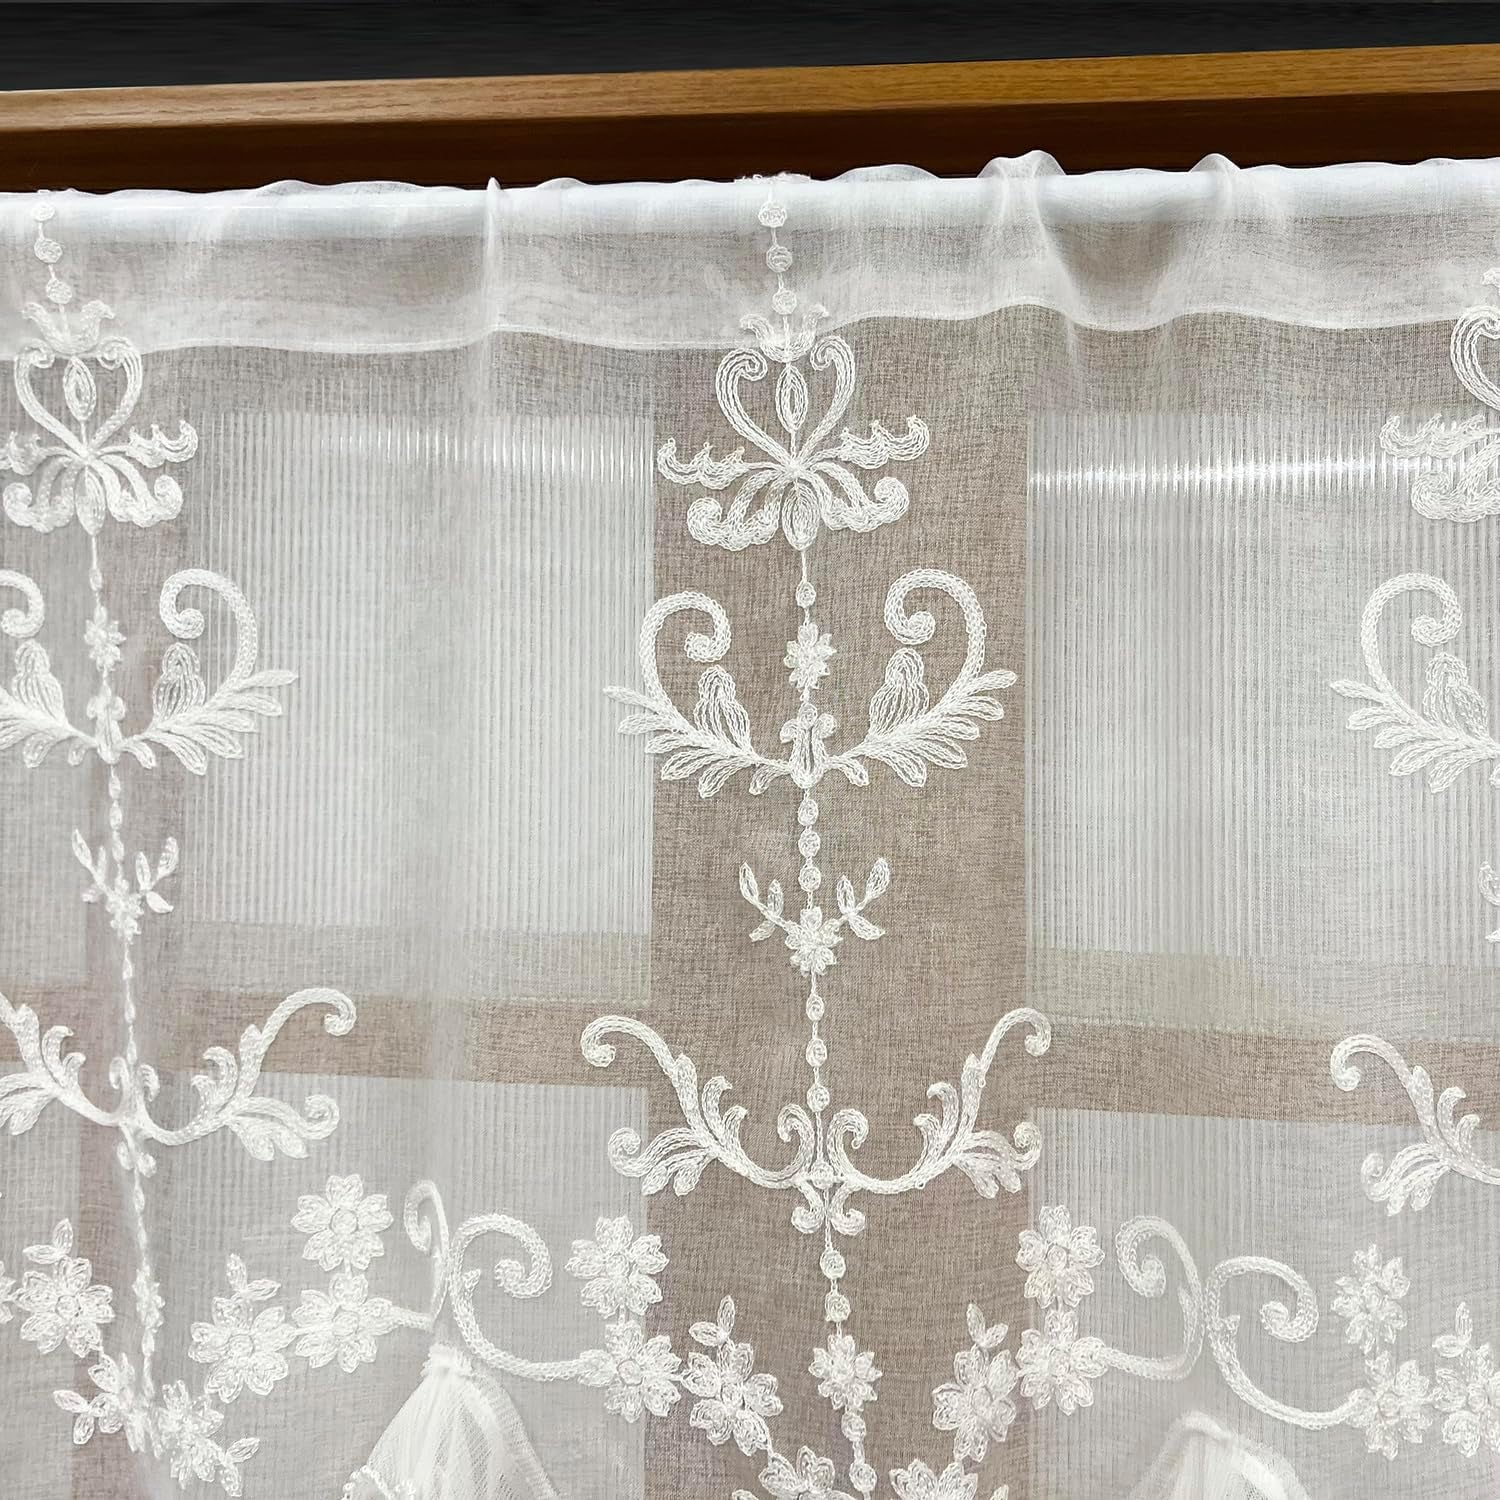 1 Panel Exquisite Floral Embroidery Sheer Curtain with Beaded Ruffled Lace Princess Style Linen Short Curtain Valance Tier for Doorway Kitchen Bathroom Window, Rod Pocket Top (White,W78 X L24 Inches)